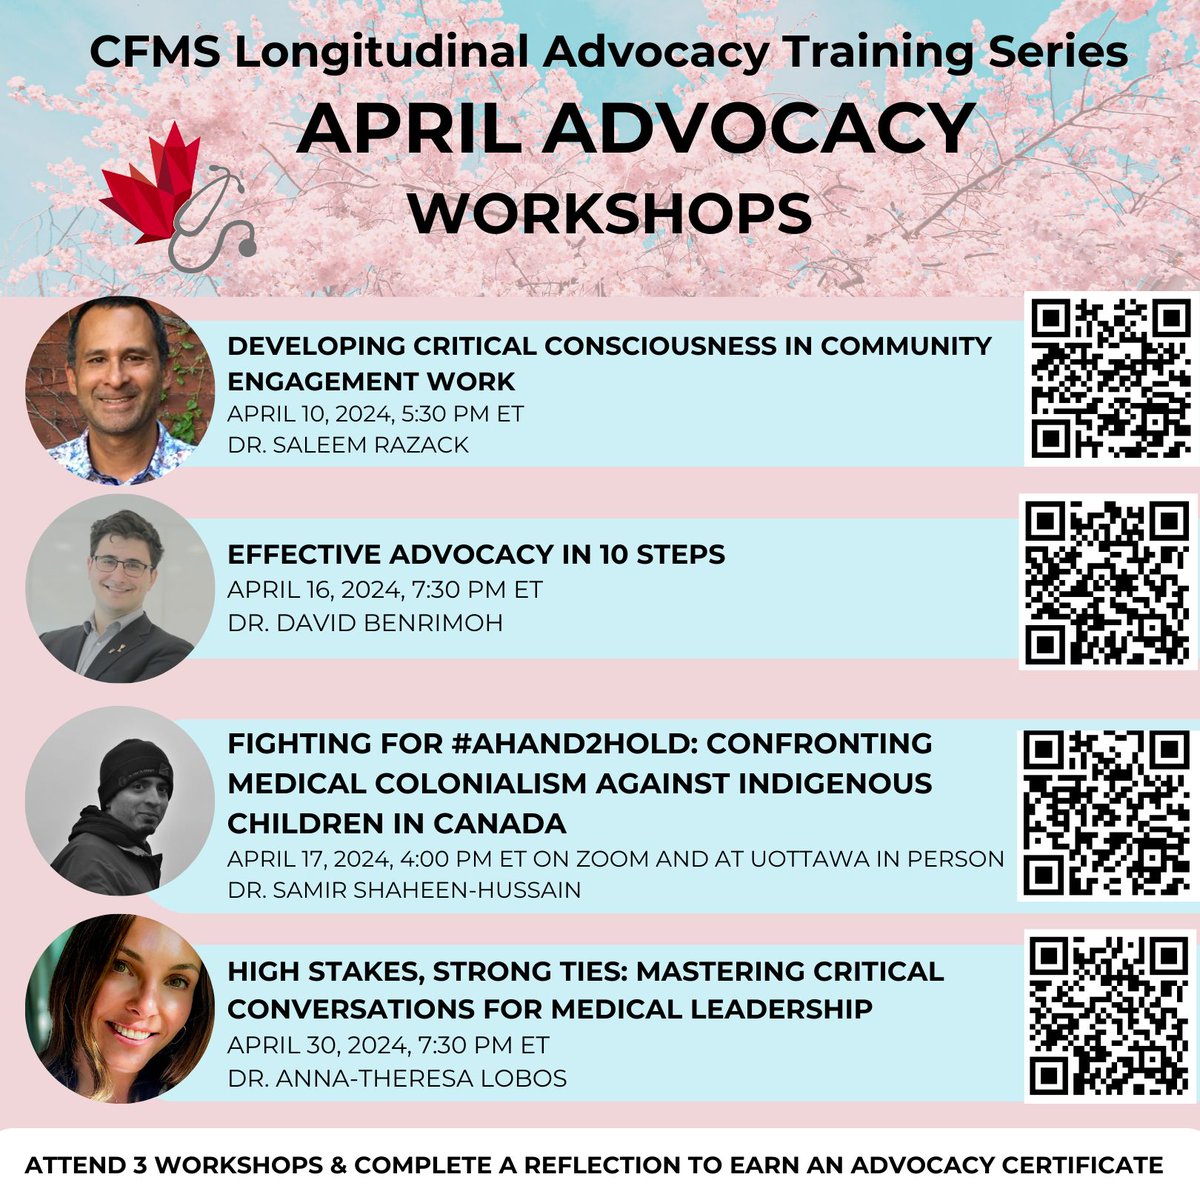 Don't miss out on two amazing LATS workshops! Learn effective advocacy with Dr. David Benrimoh on April 16, and meet Samir Shaheen-Hussain, author of the award-winning book 'Fighting for A Hand to Hold,' on April 17 Apr 17: buff.ly/3Q1bpzo Apr 16: buff.ly/3vUjgrH